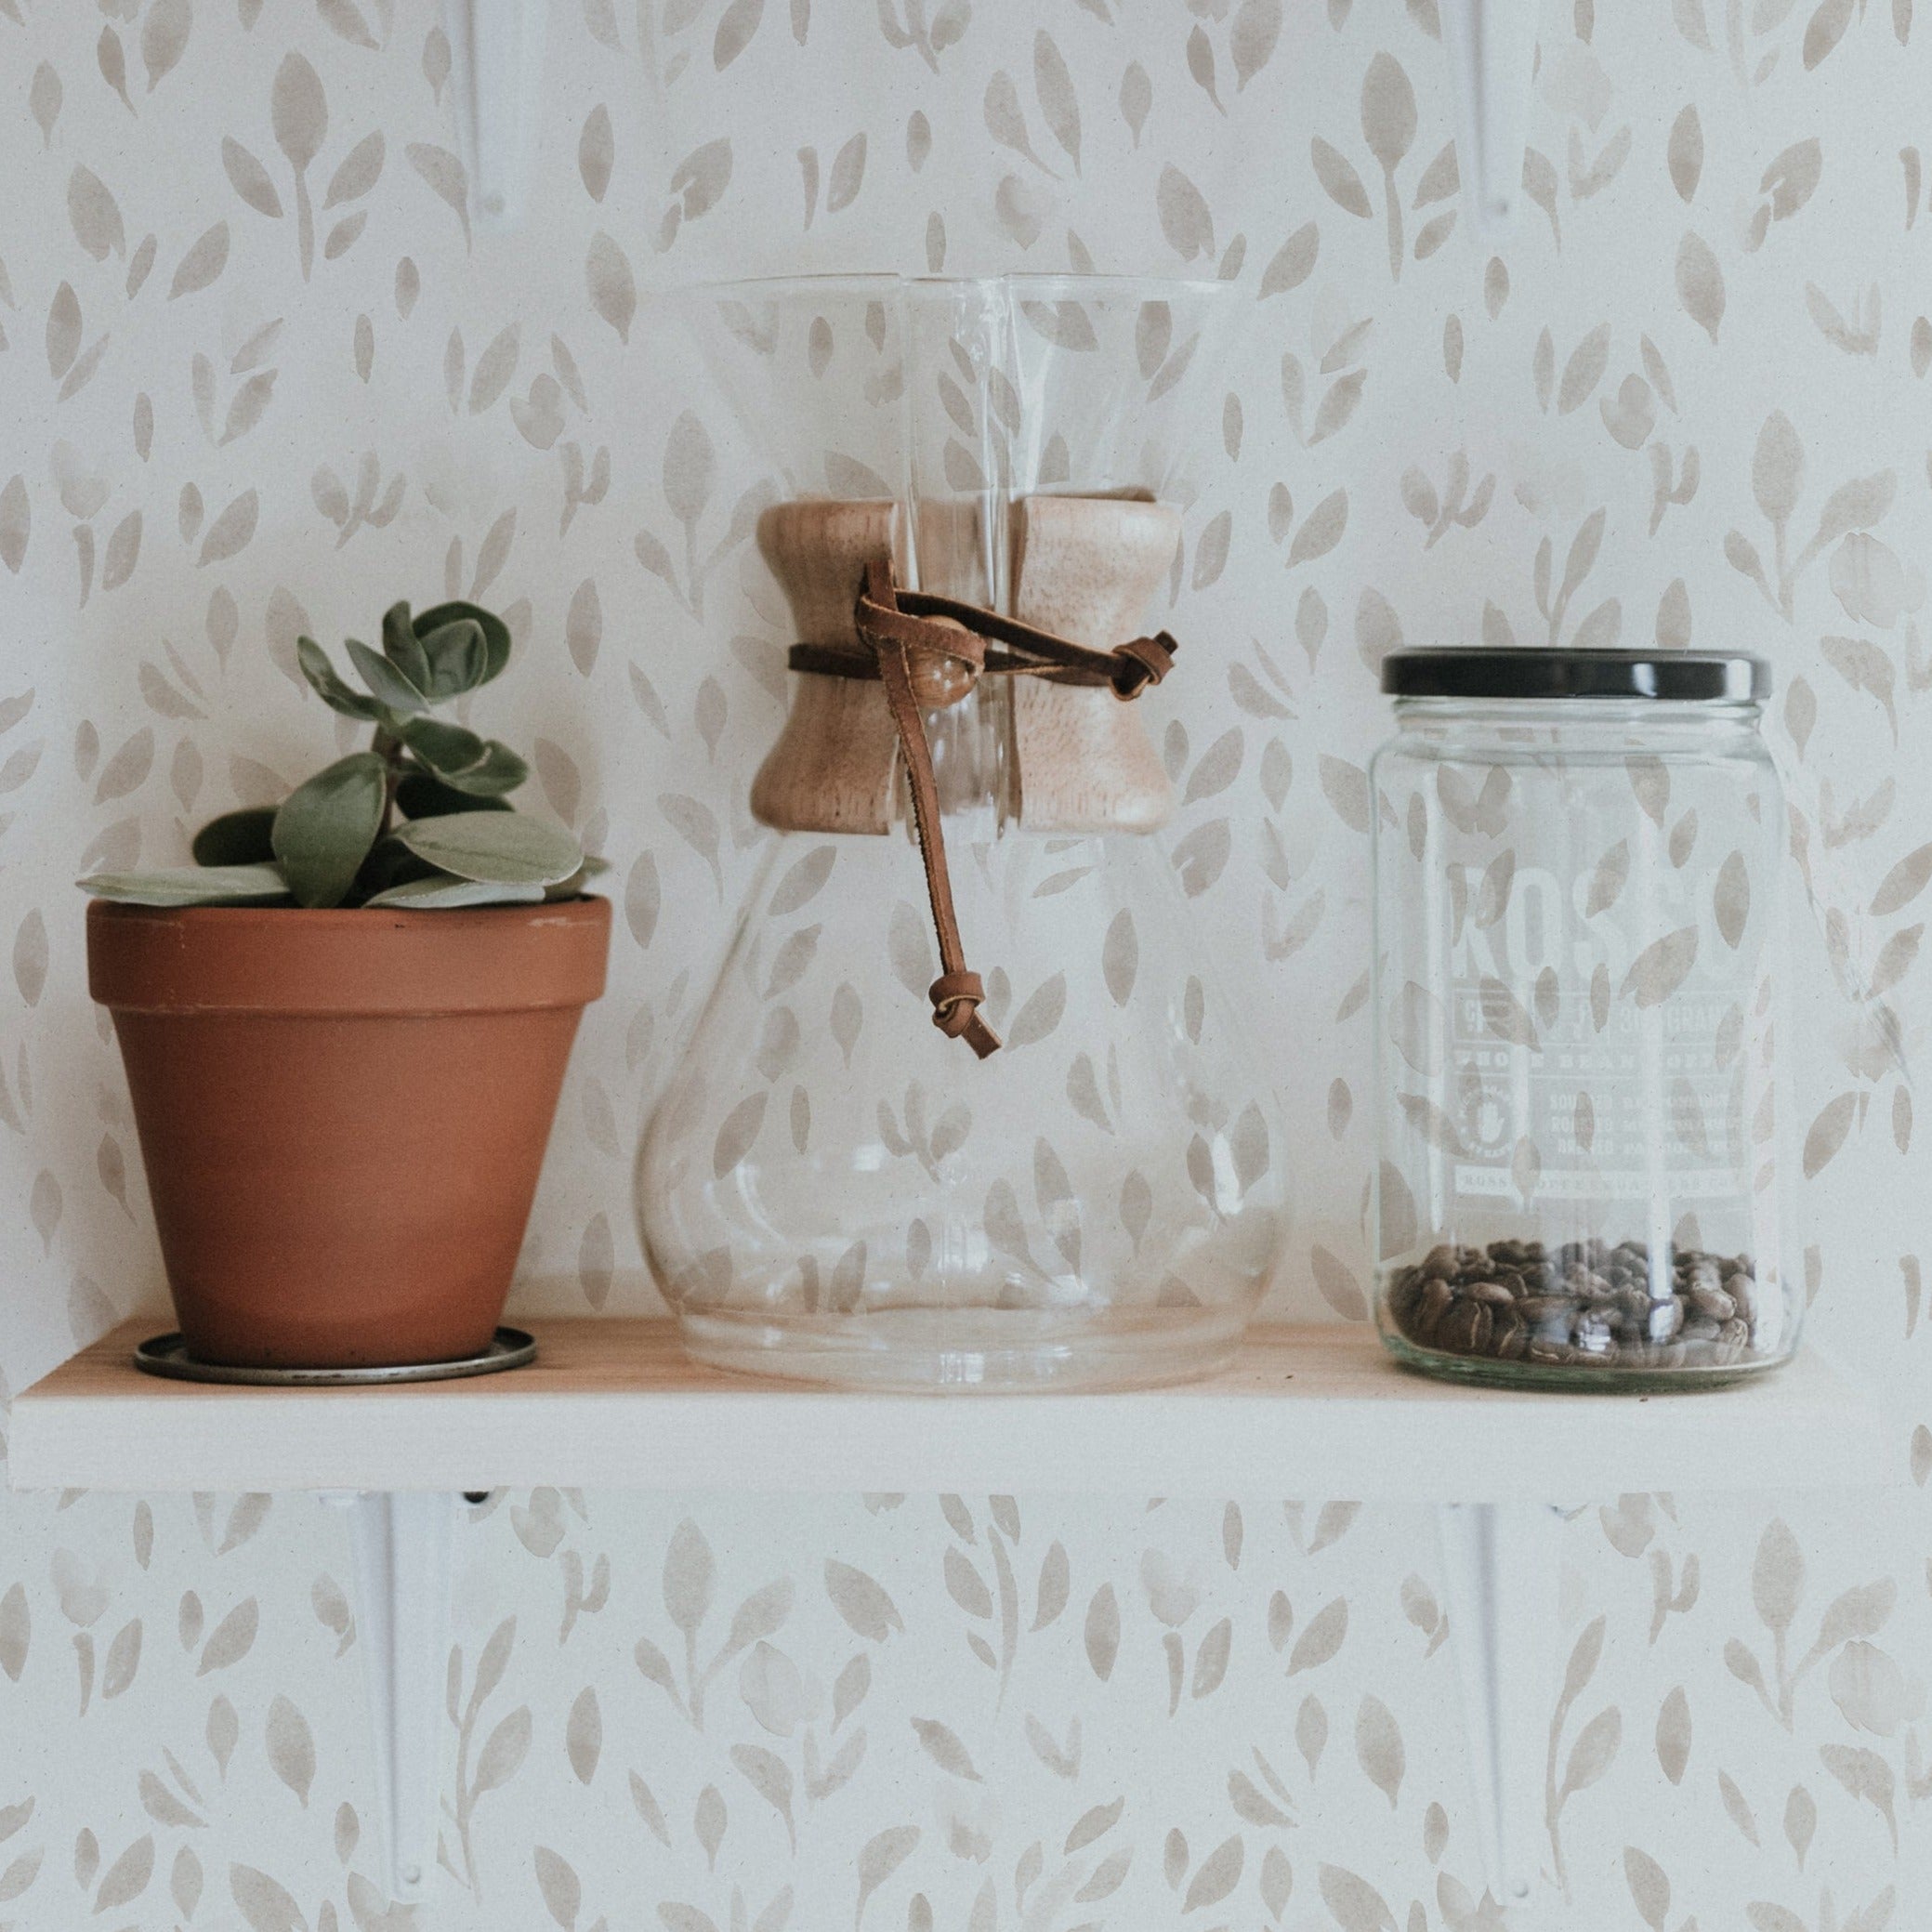 A close-up of a kitchen shelf against the 'Subtle Botanica - Linen' wallpaper, with terracotta pots housing vibrant green succulents, a clear glass vase tied with a leather cord, and a jar of coffee beans, complementing the organic theme.